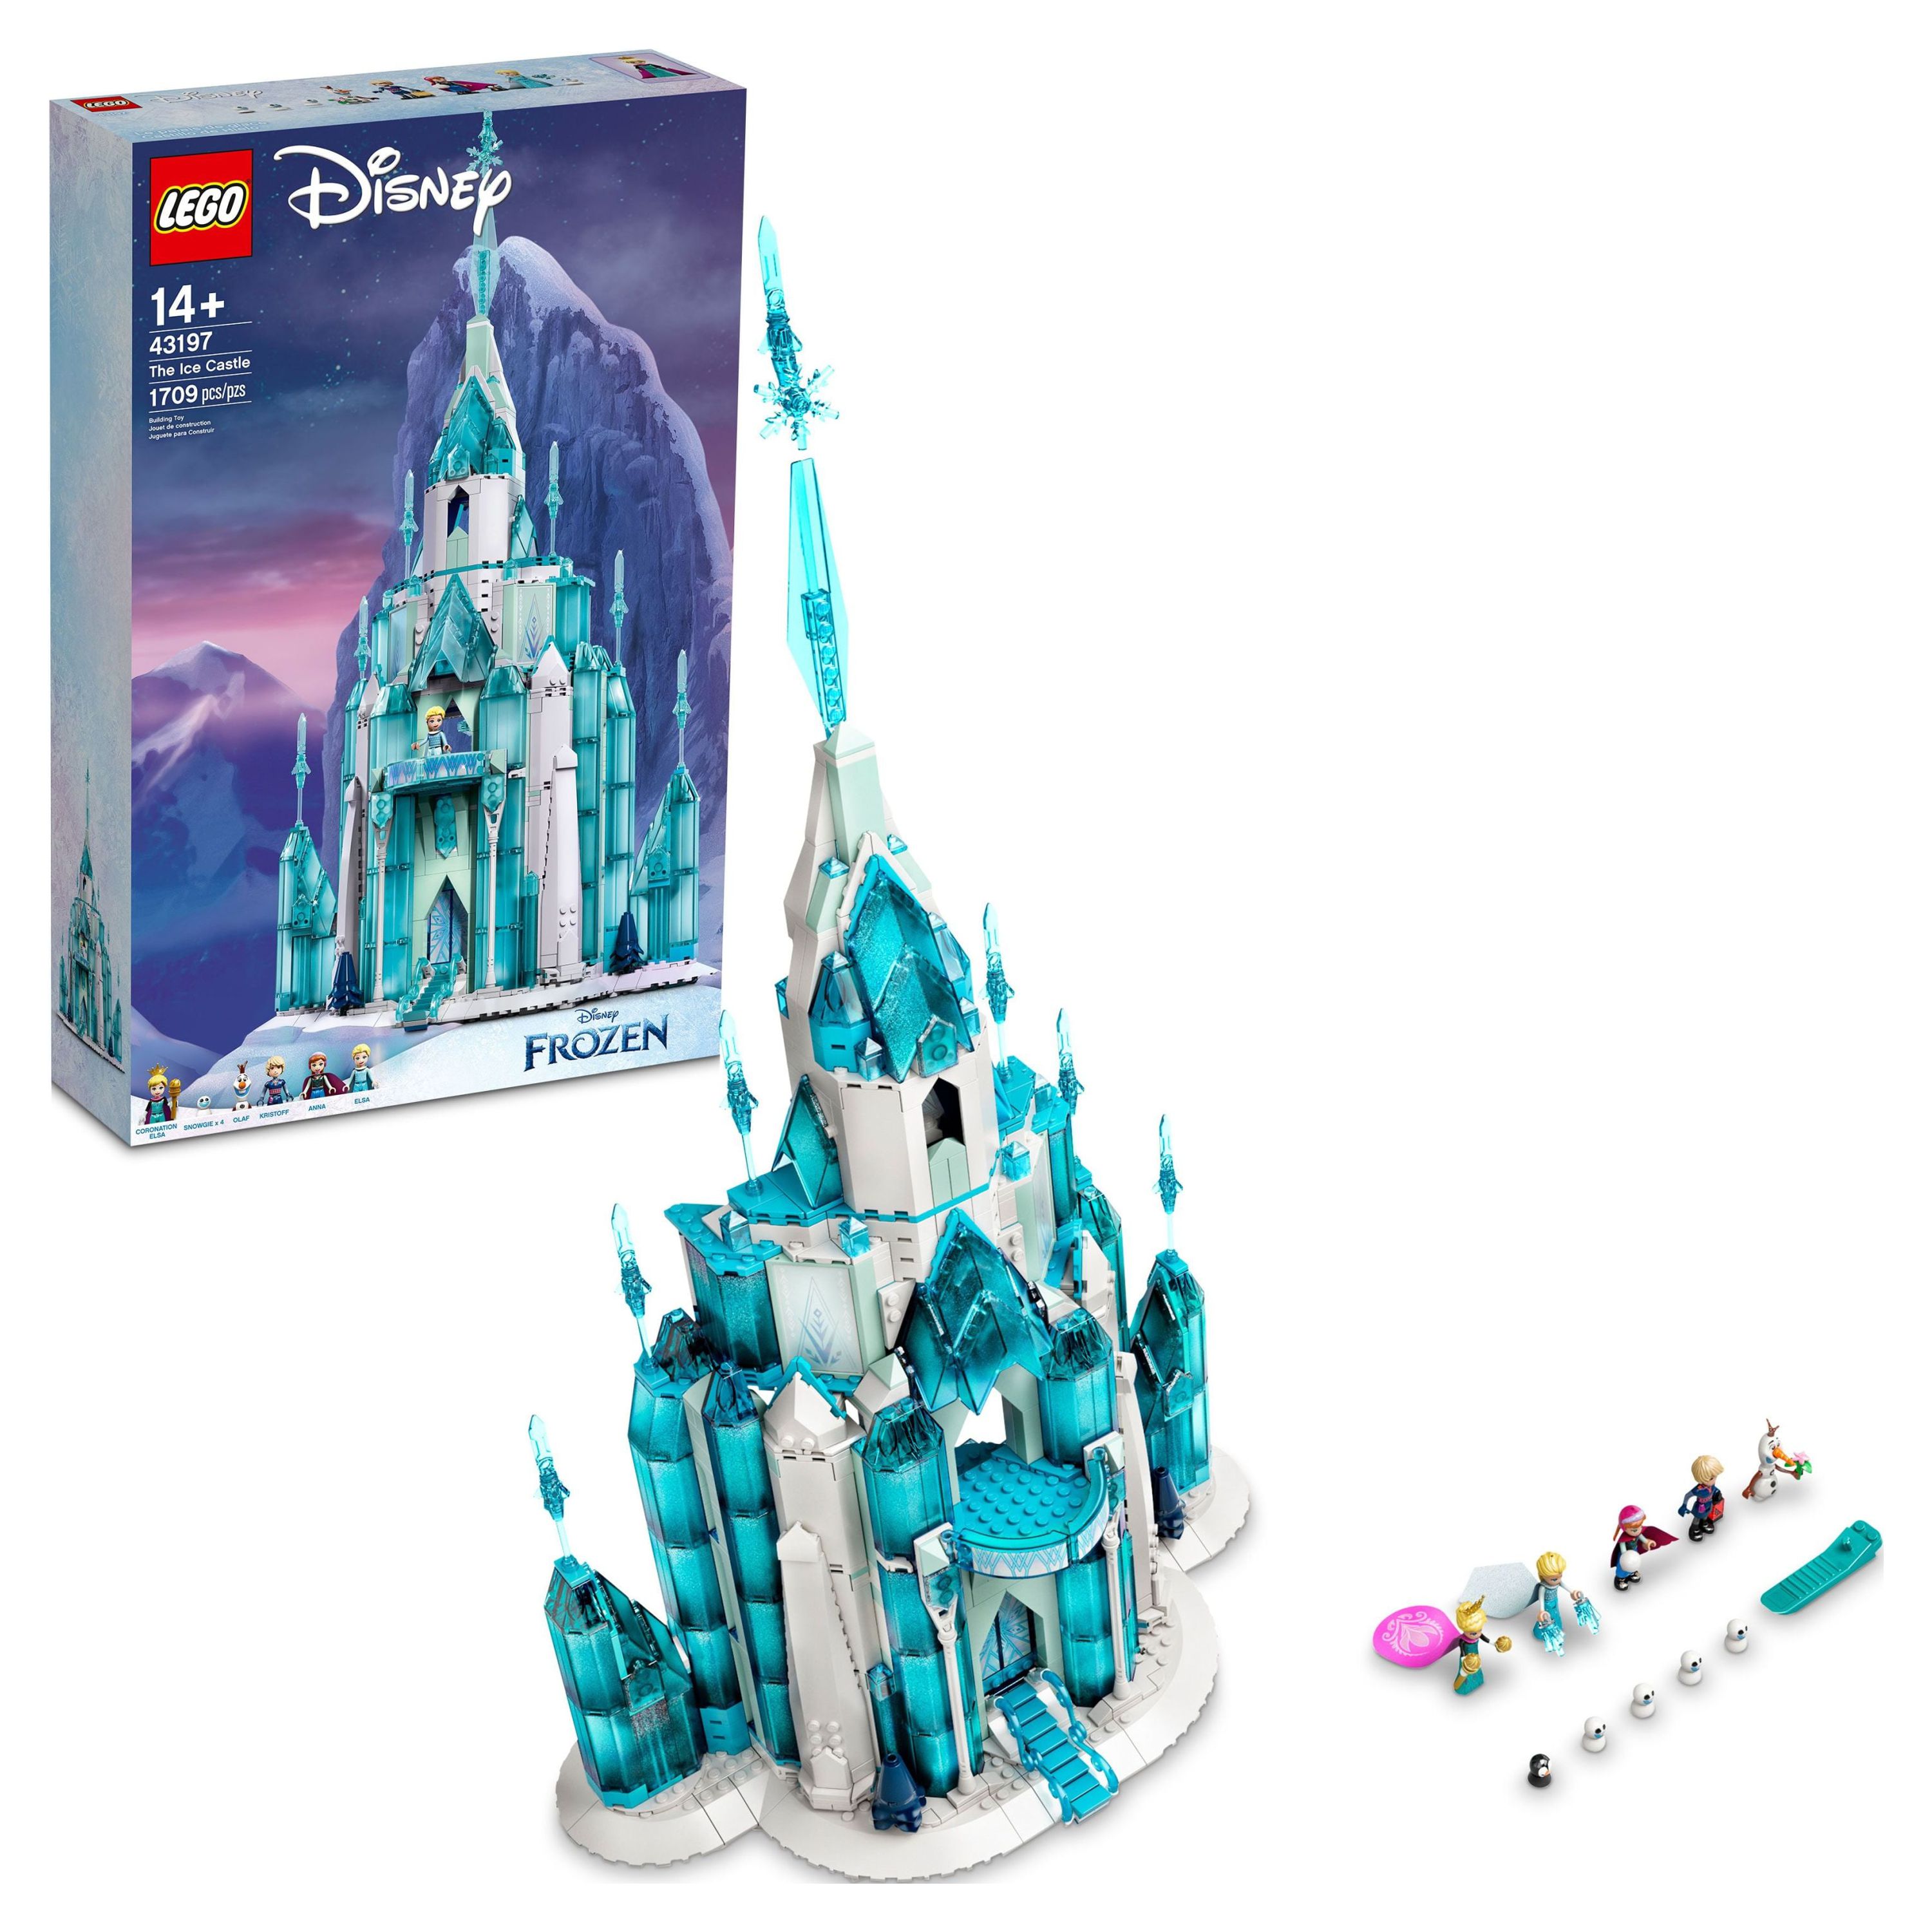 LEGO Disney Princess The Ice Castle Building Toy 43197, with Frozen Anna and Elsa Mini Doll Figures and Olaf Figure, Disney Castle Kit to Build, Disney Gift Idea, Castle Toy for Kids Age 6+ Years Old - image 1 of 8